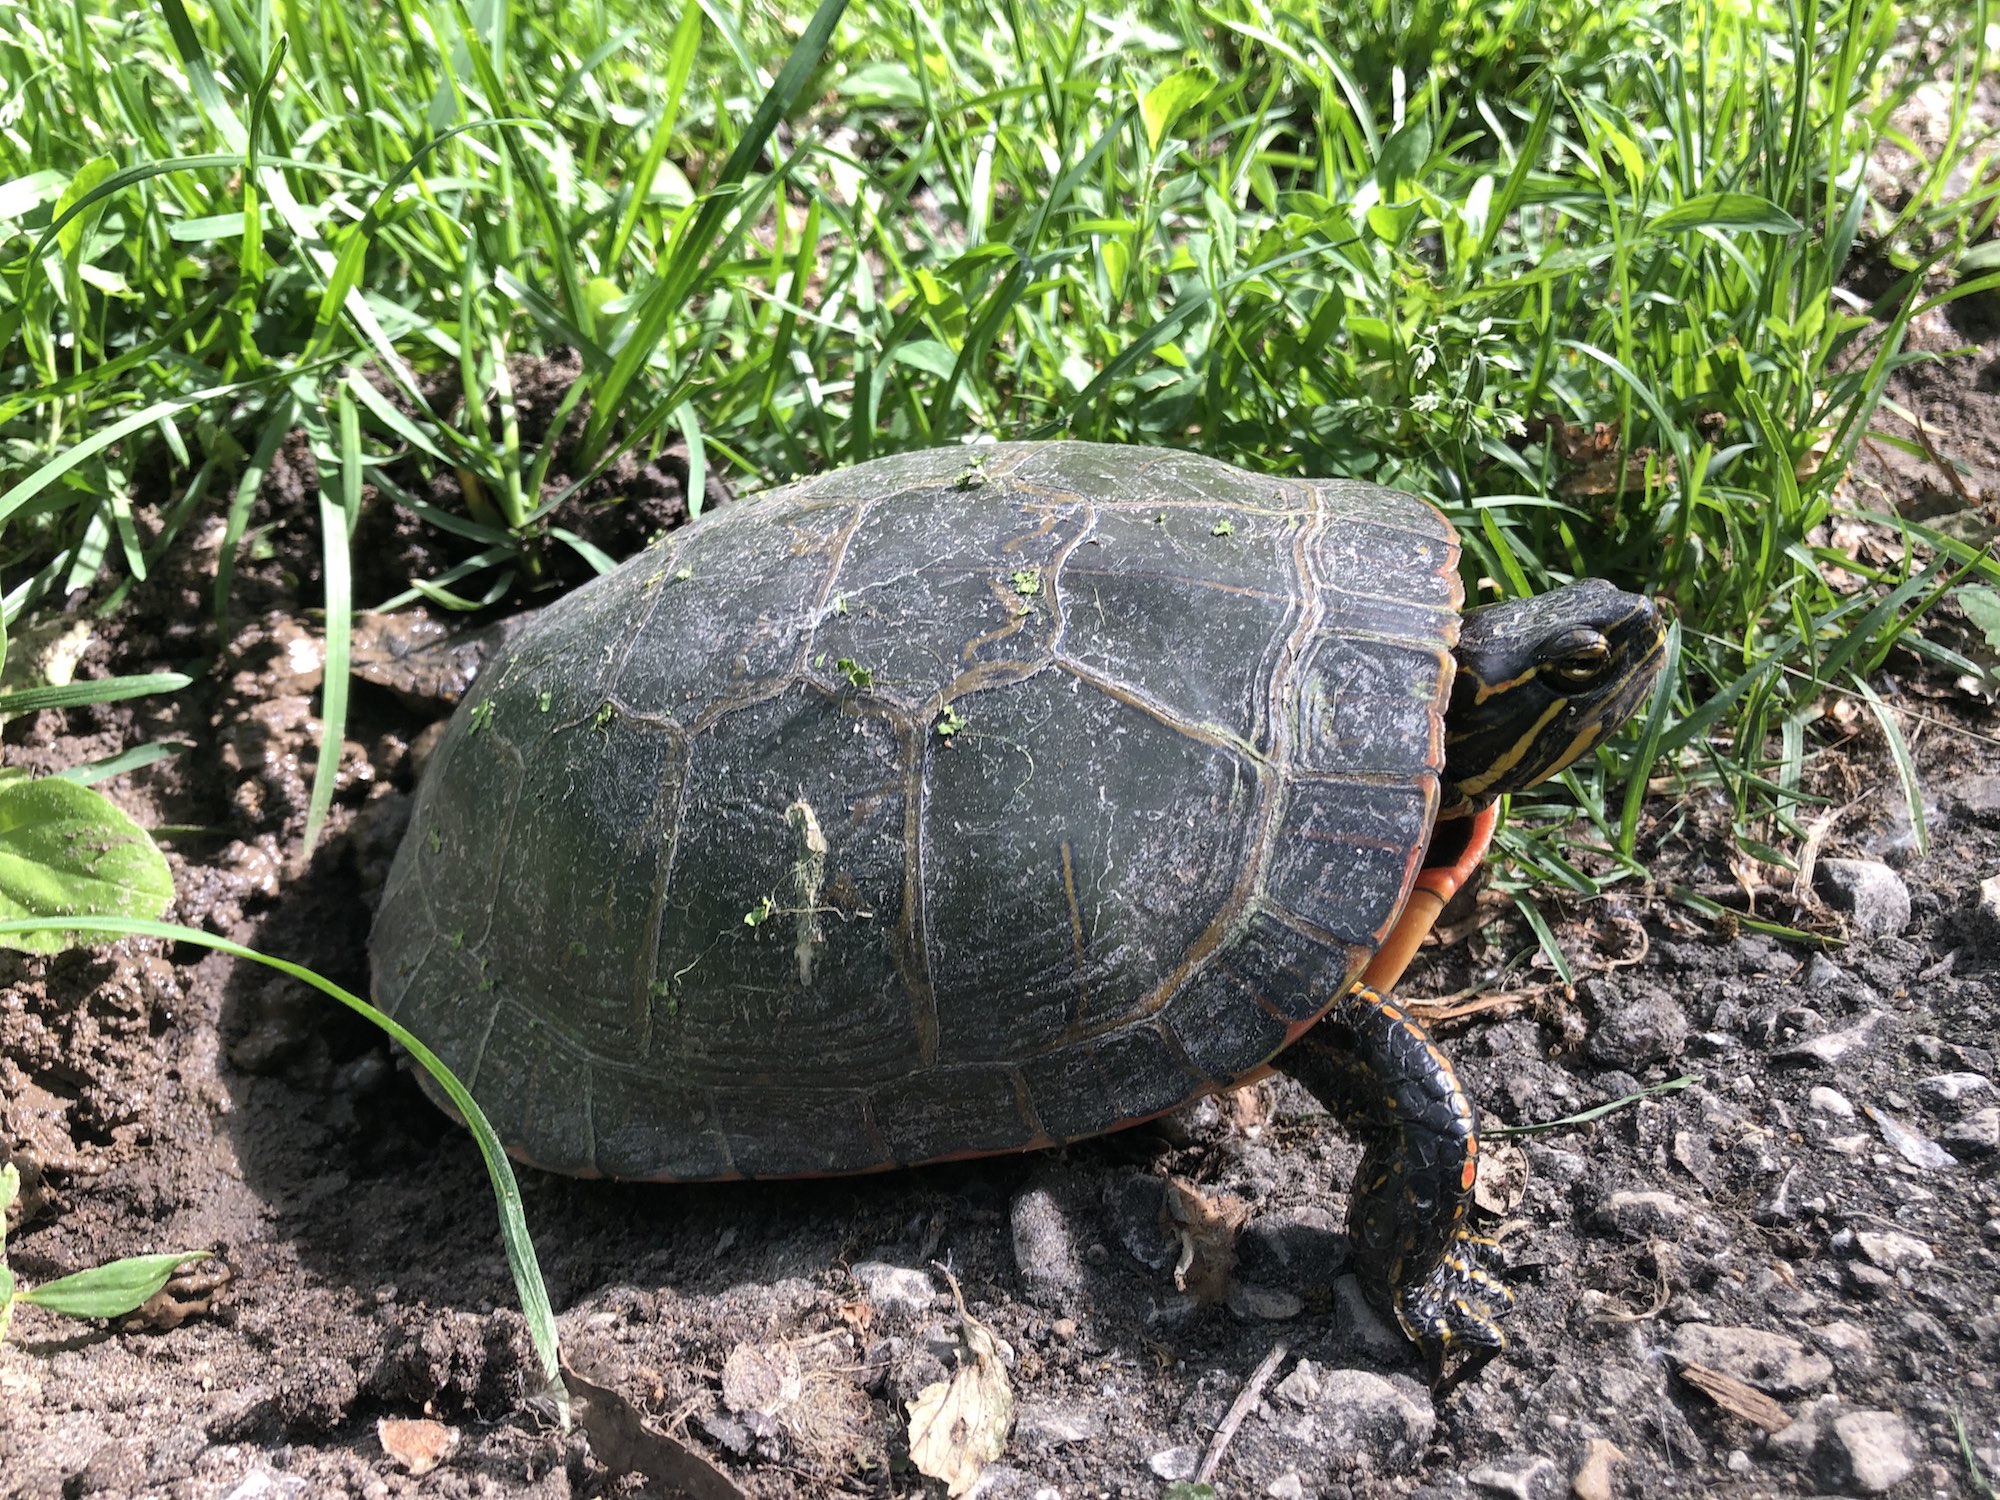 Painted Turtle laying eggs in Oak Savanna along bike path in Madison, Wisconsin on June 8, 2019.